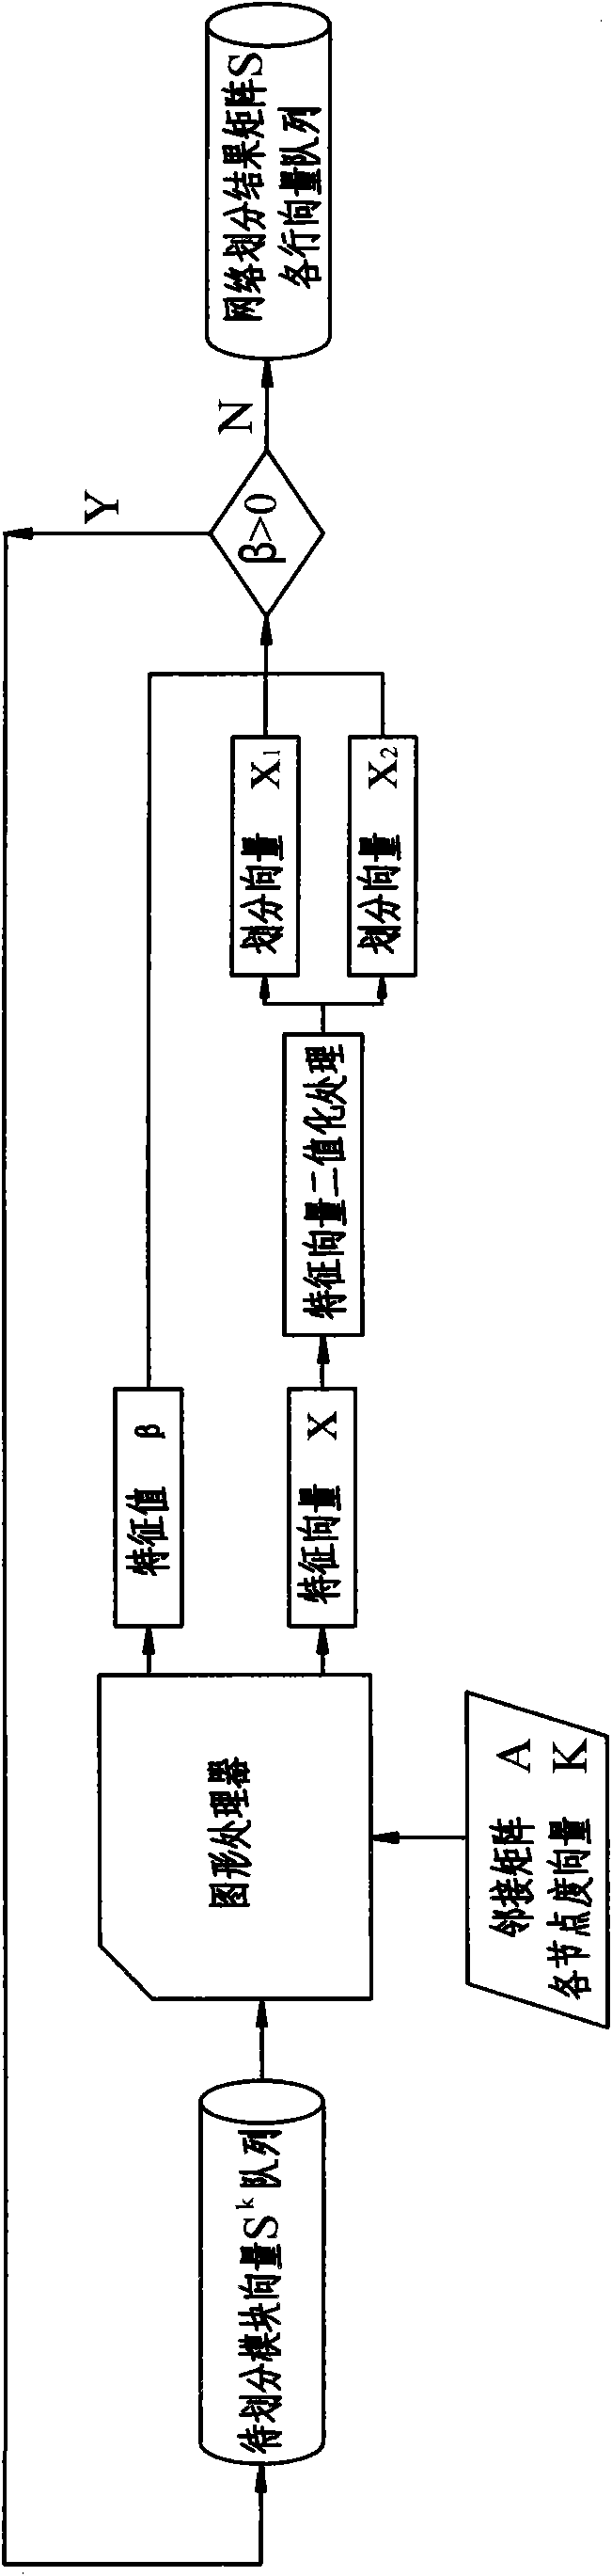 Method for partitioning large-scale static network based on graphics processor